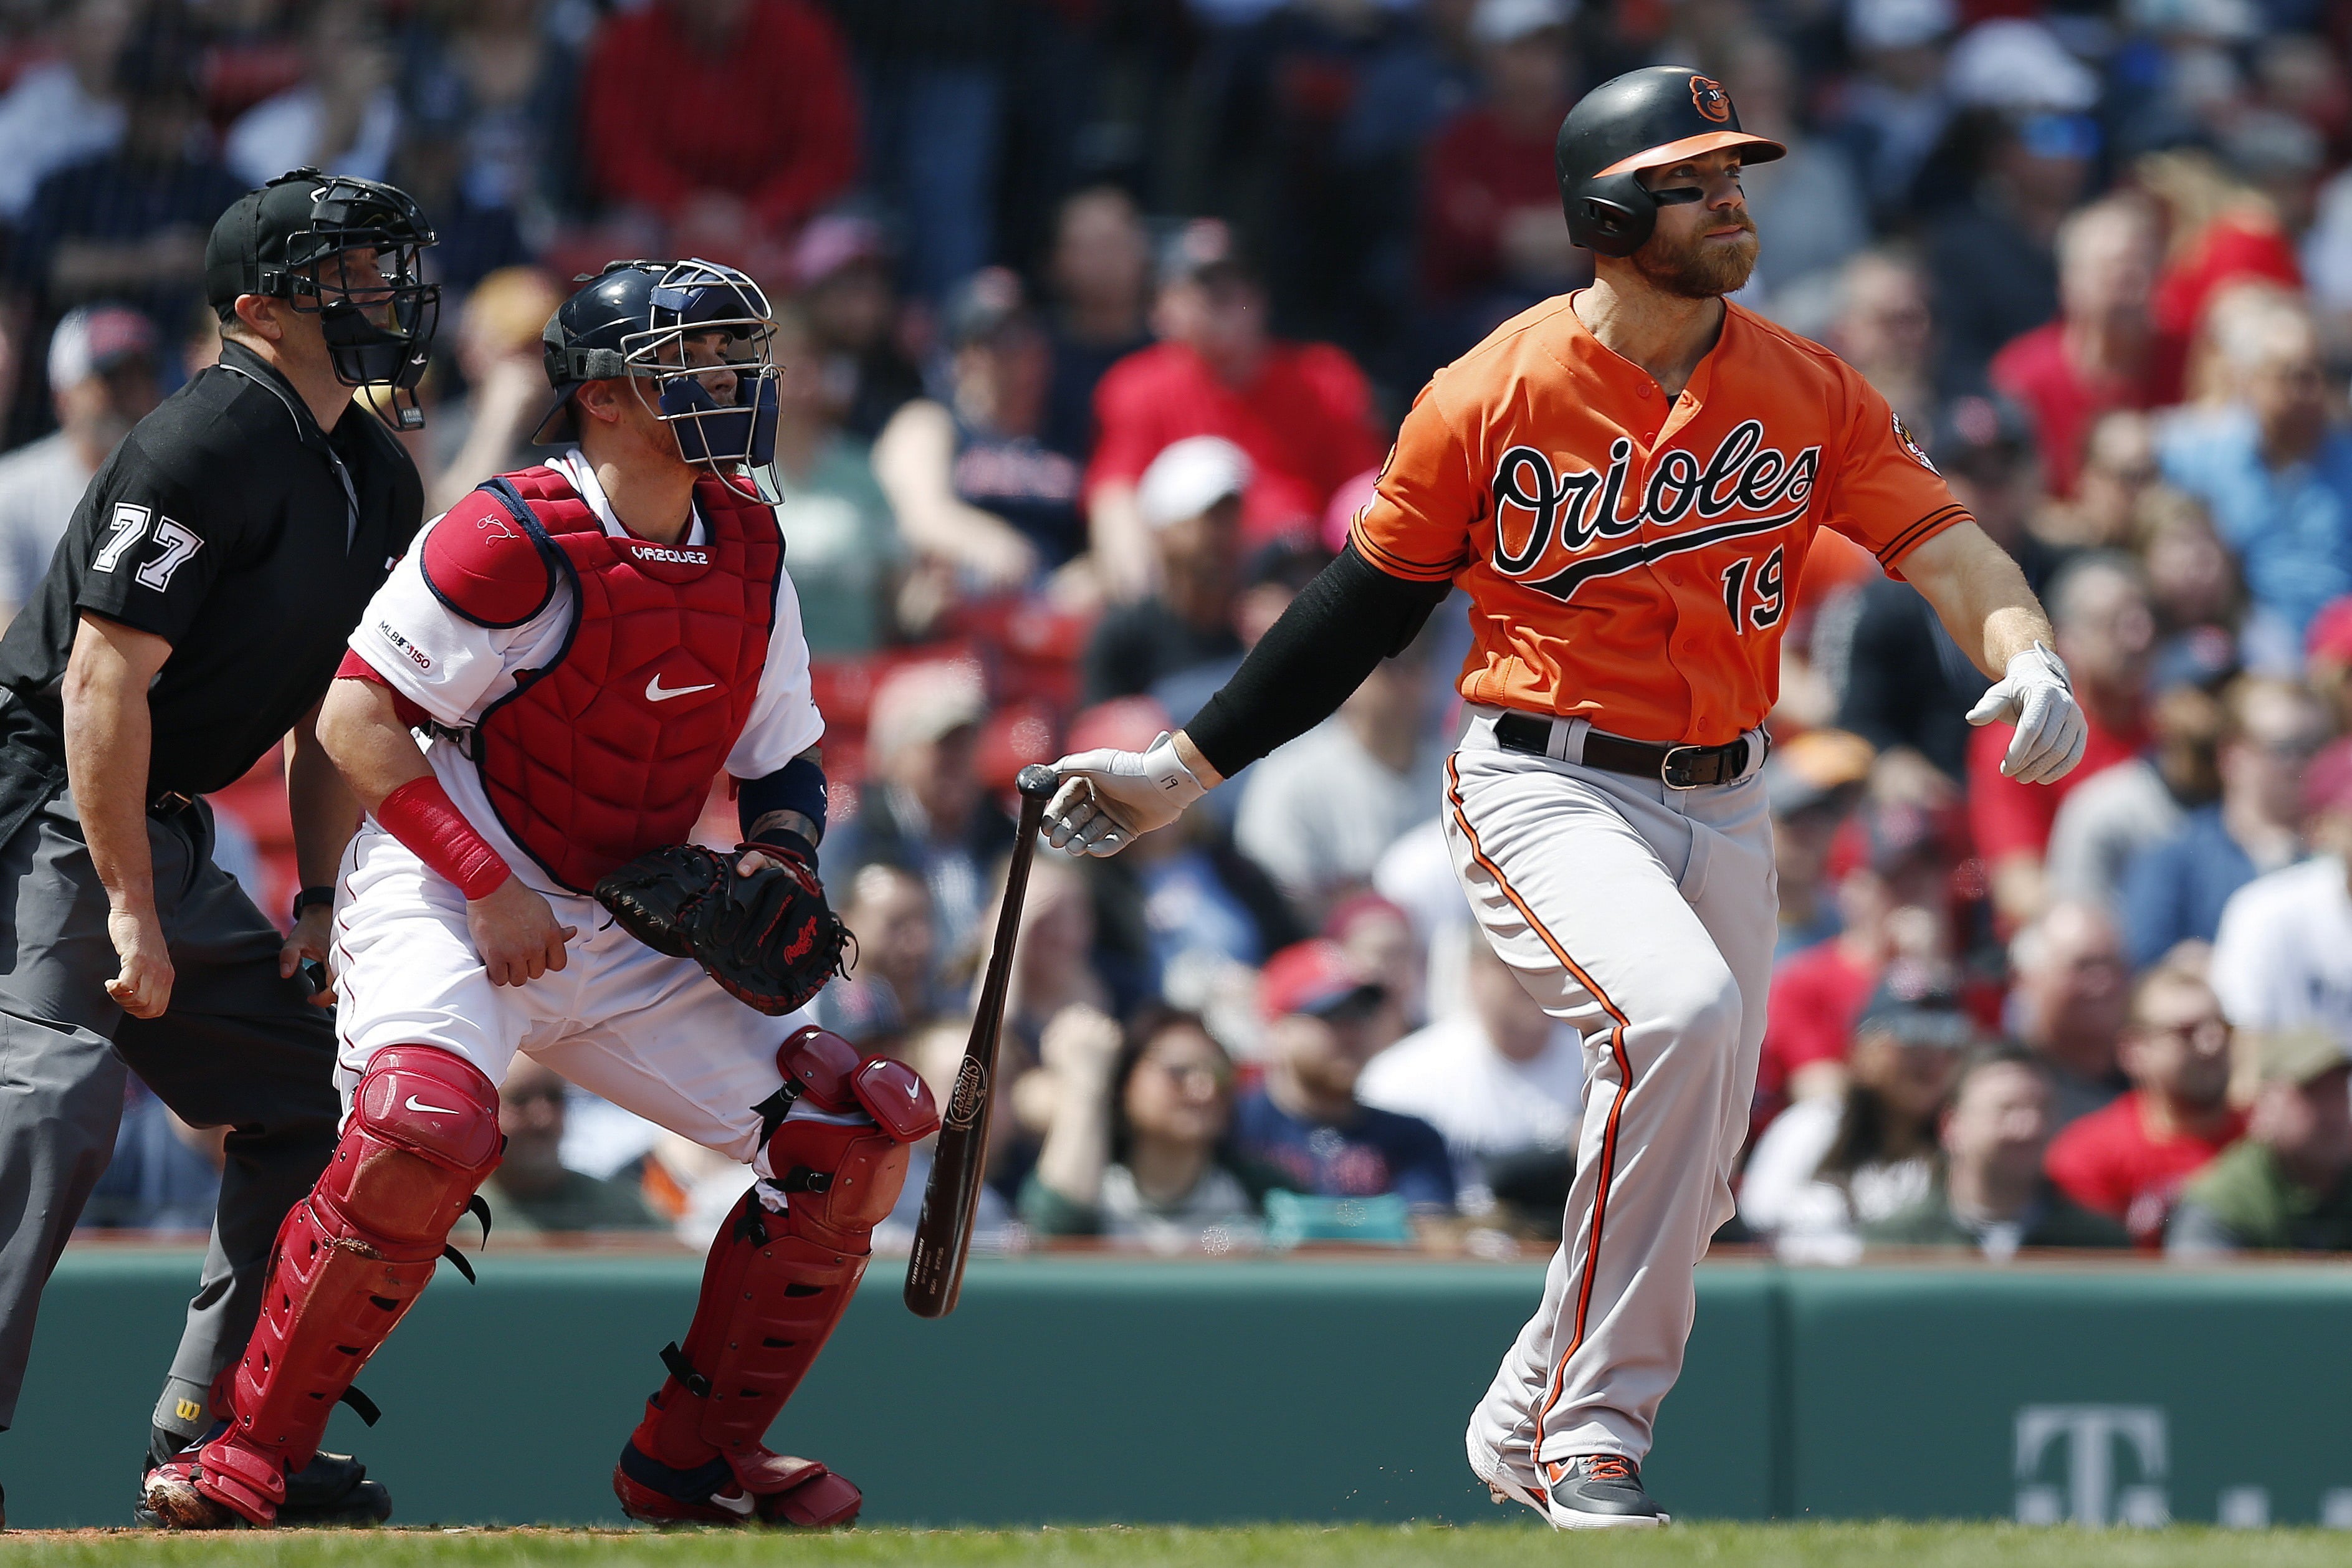 Baltimore Orioles' Chris Davis watches his two-run single in front of Boston Red Sox's Christian Vazquez during the first inning of a baseball game in Boston, Saturday, April 13, 2019.